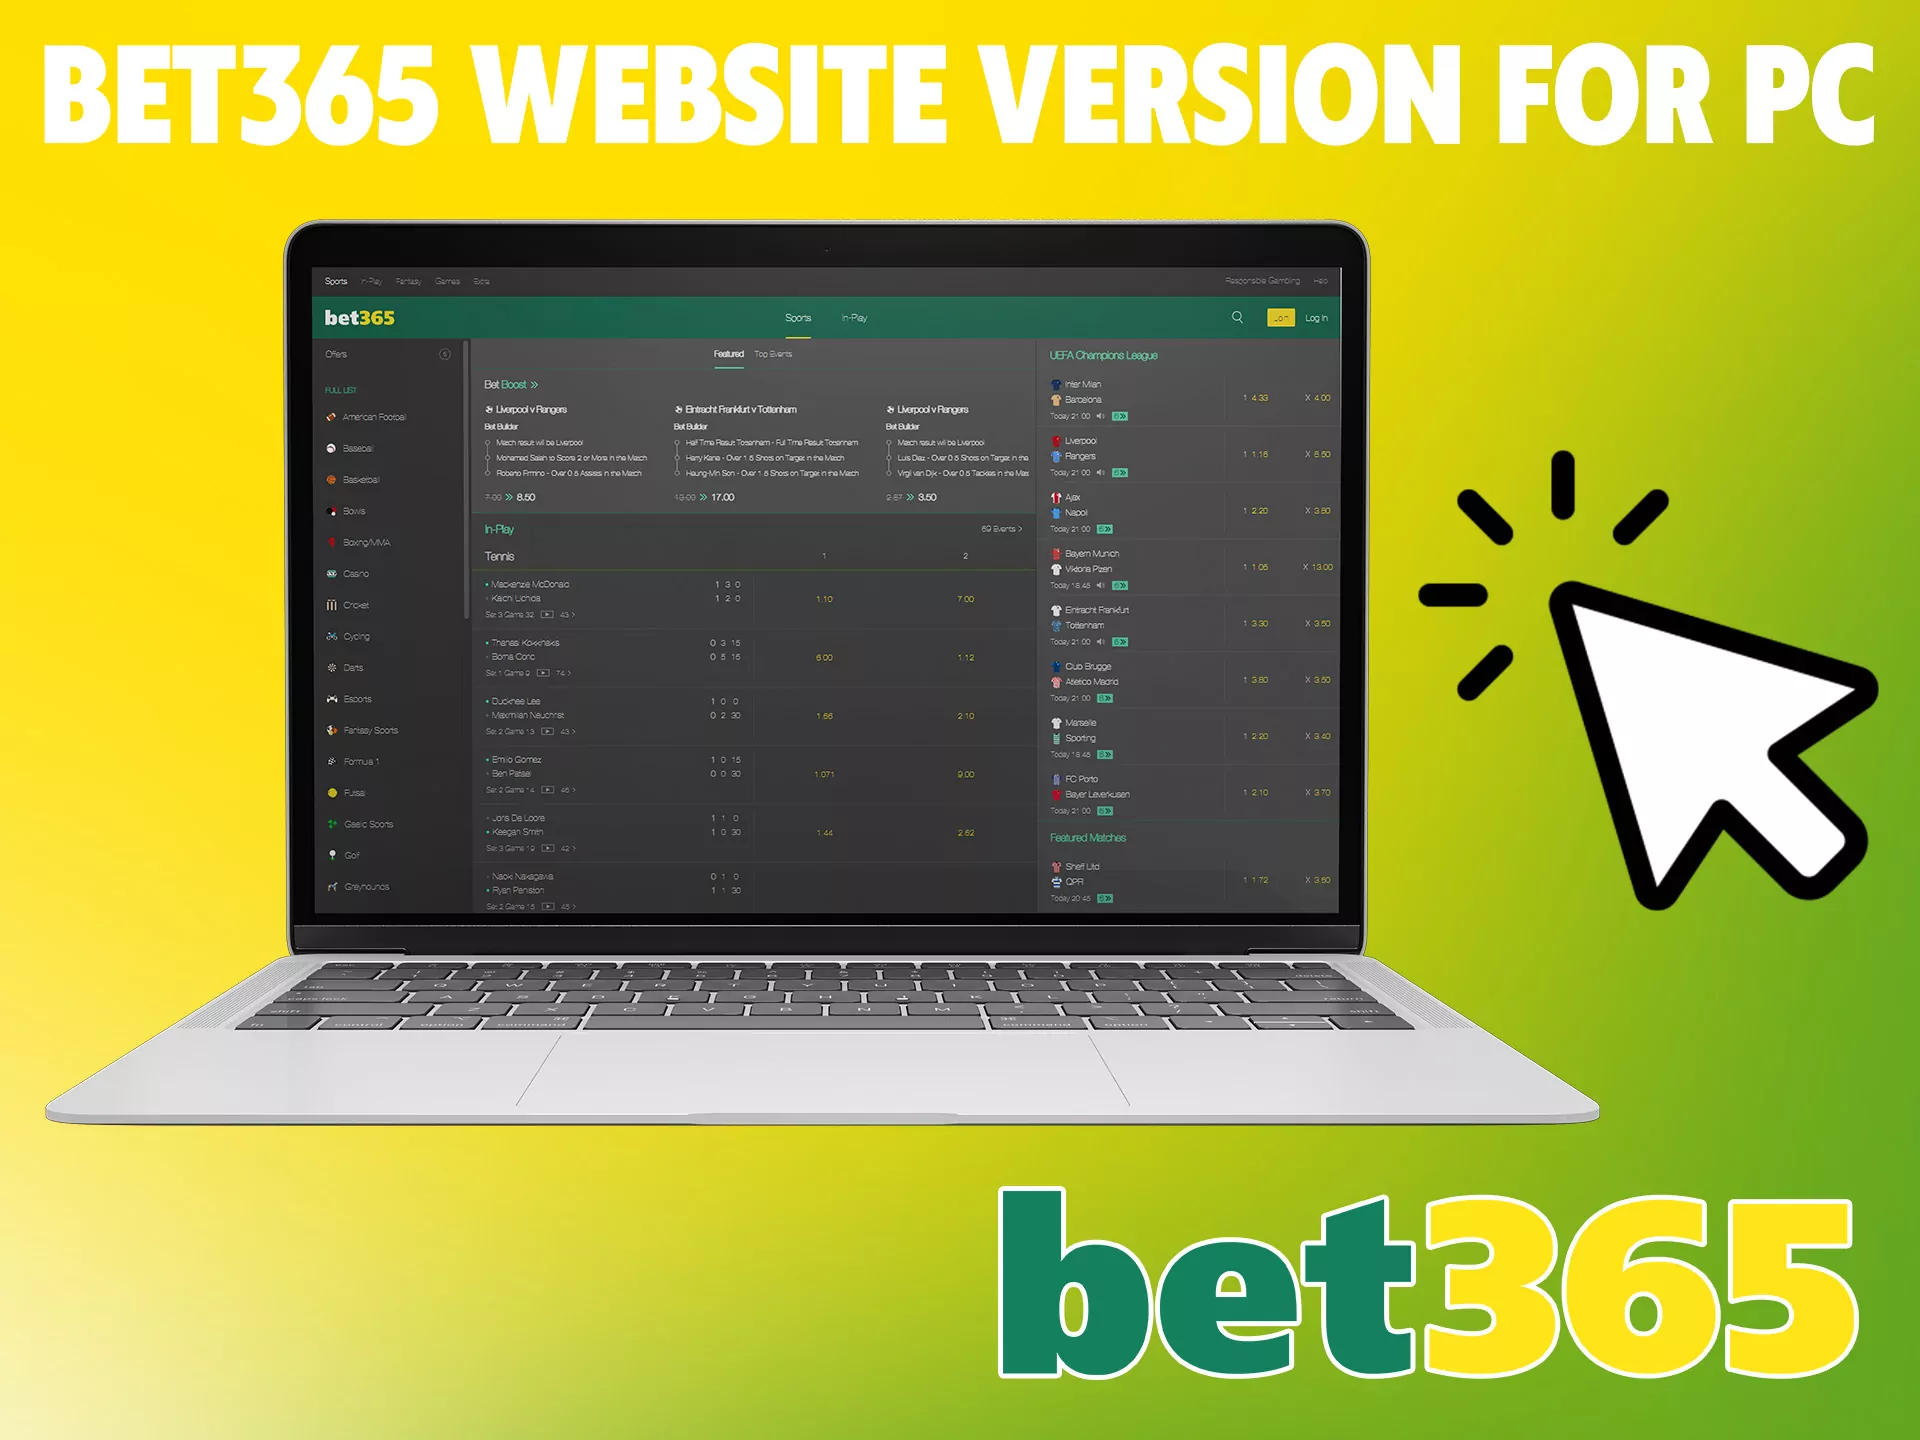 You can play and bet at Bet365 on any PC.